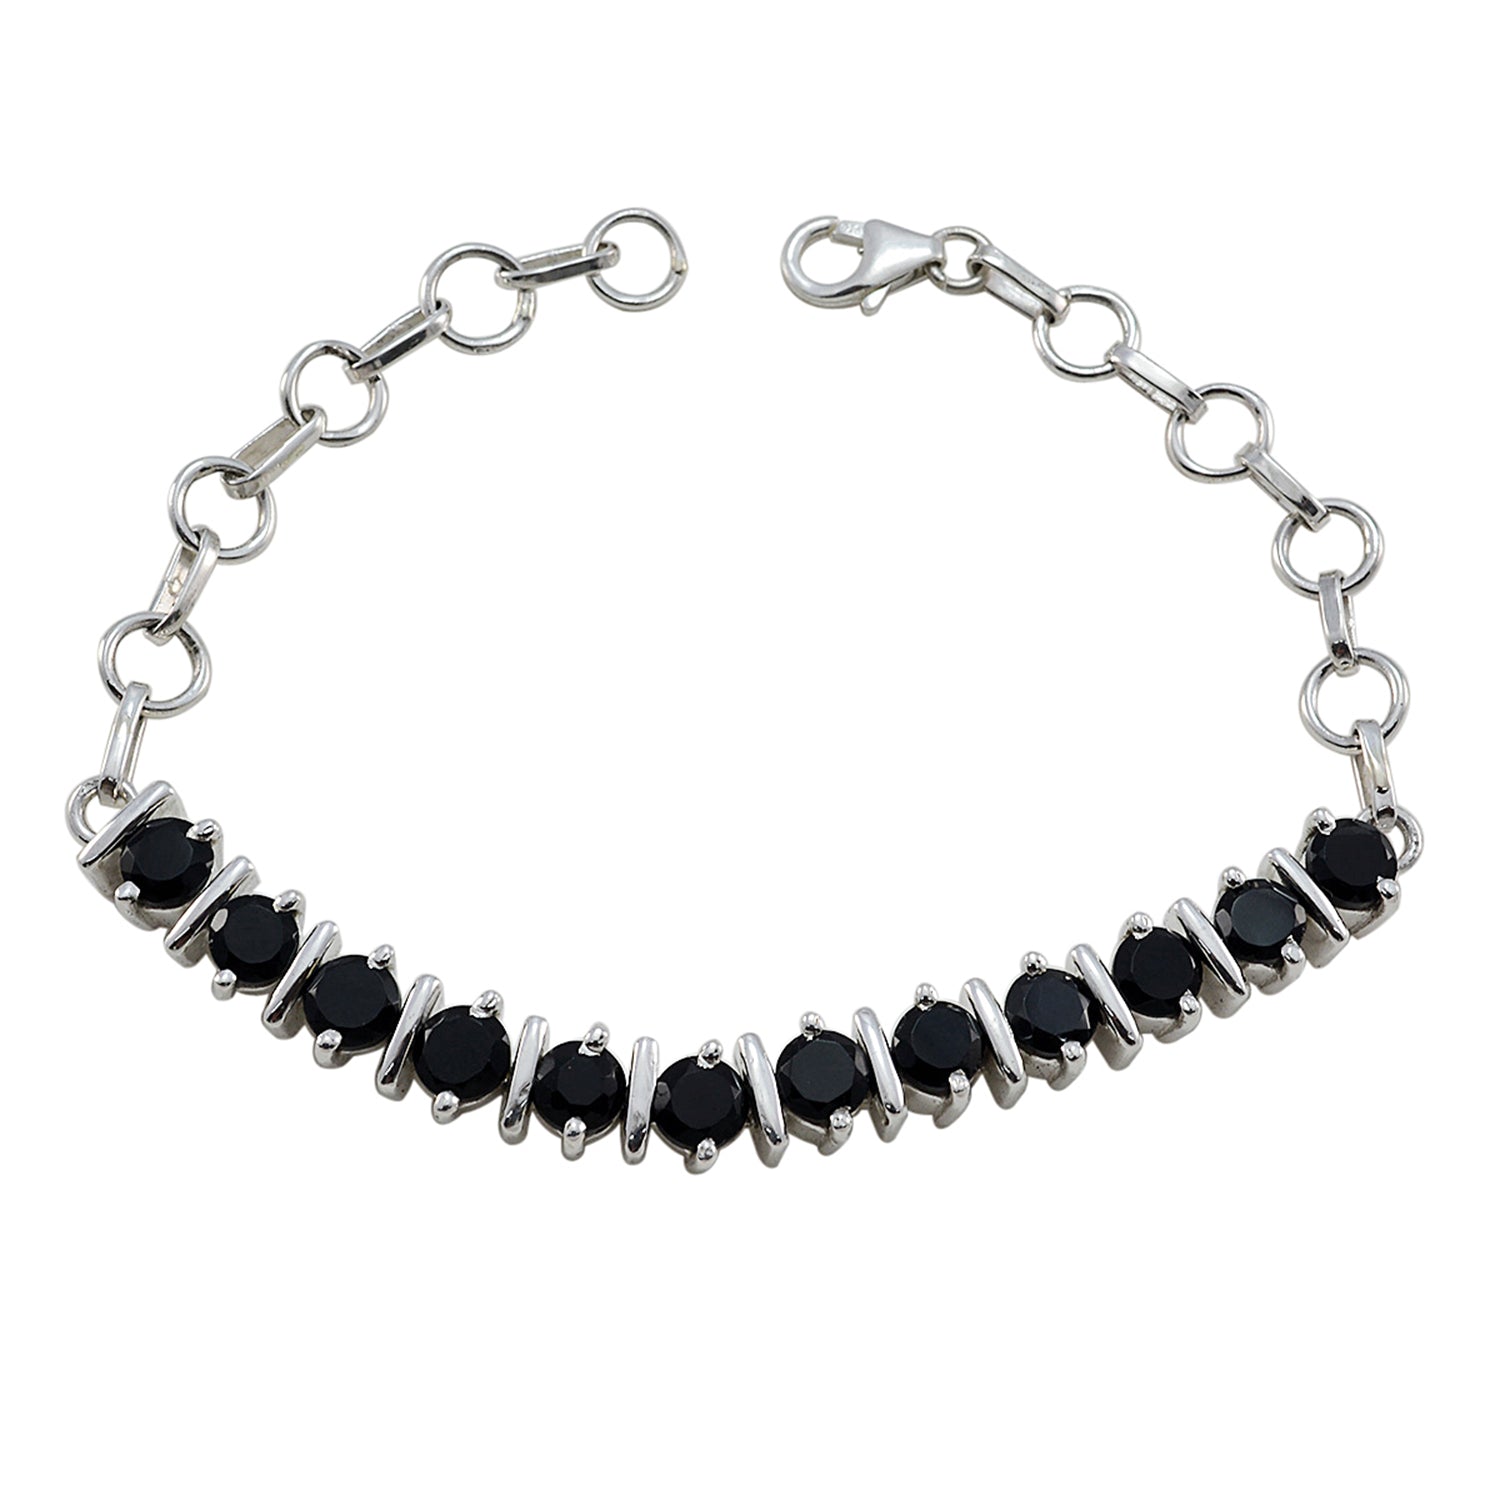 Riyo Good Gemstones Round Faceted Black Black Onyx Silver Bracelets gift for mother's day